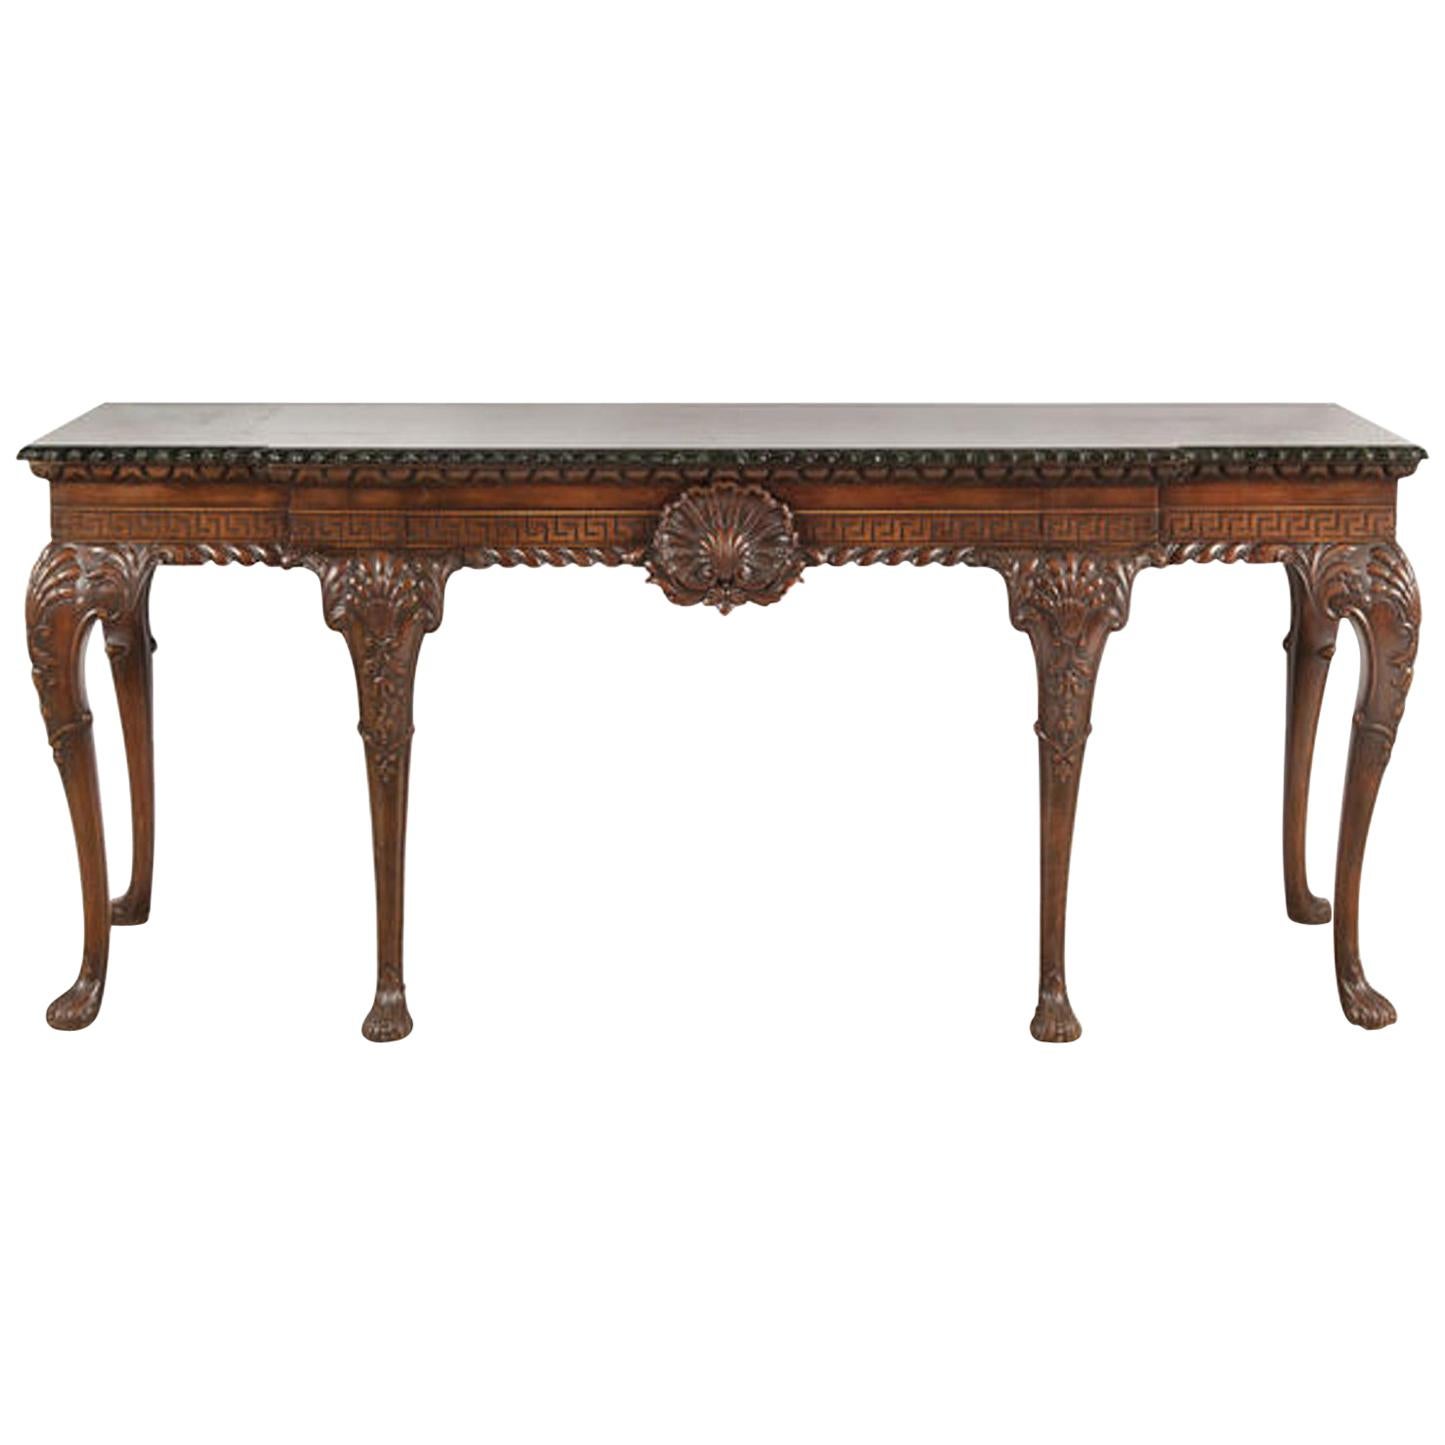 English George II Style Carved Mahogany Console, 19th Century